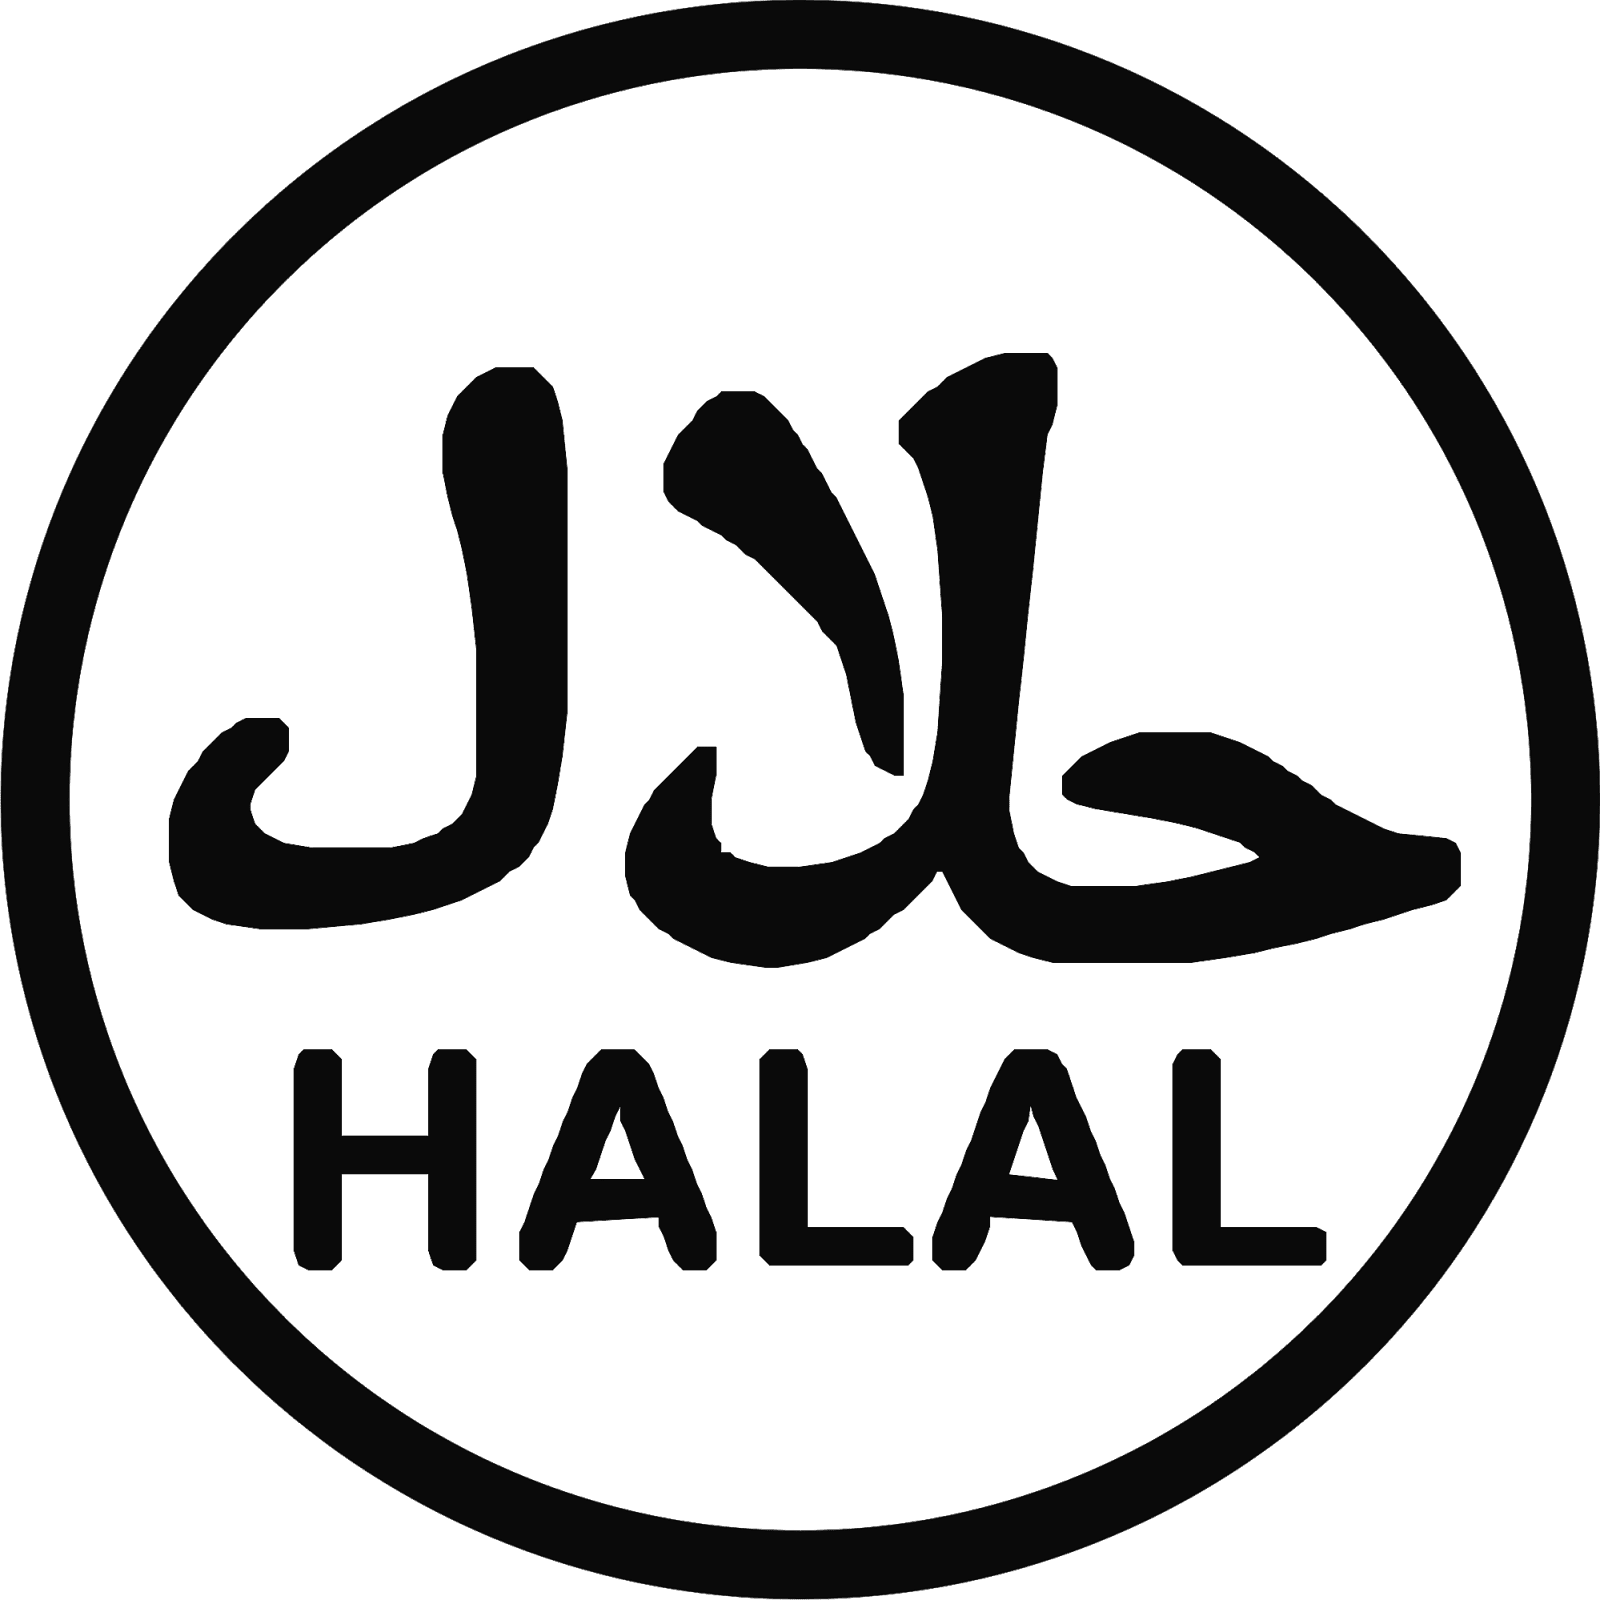 Halal !! What does it means actually